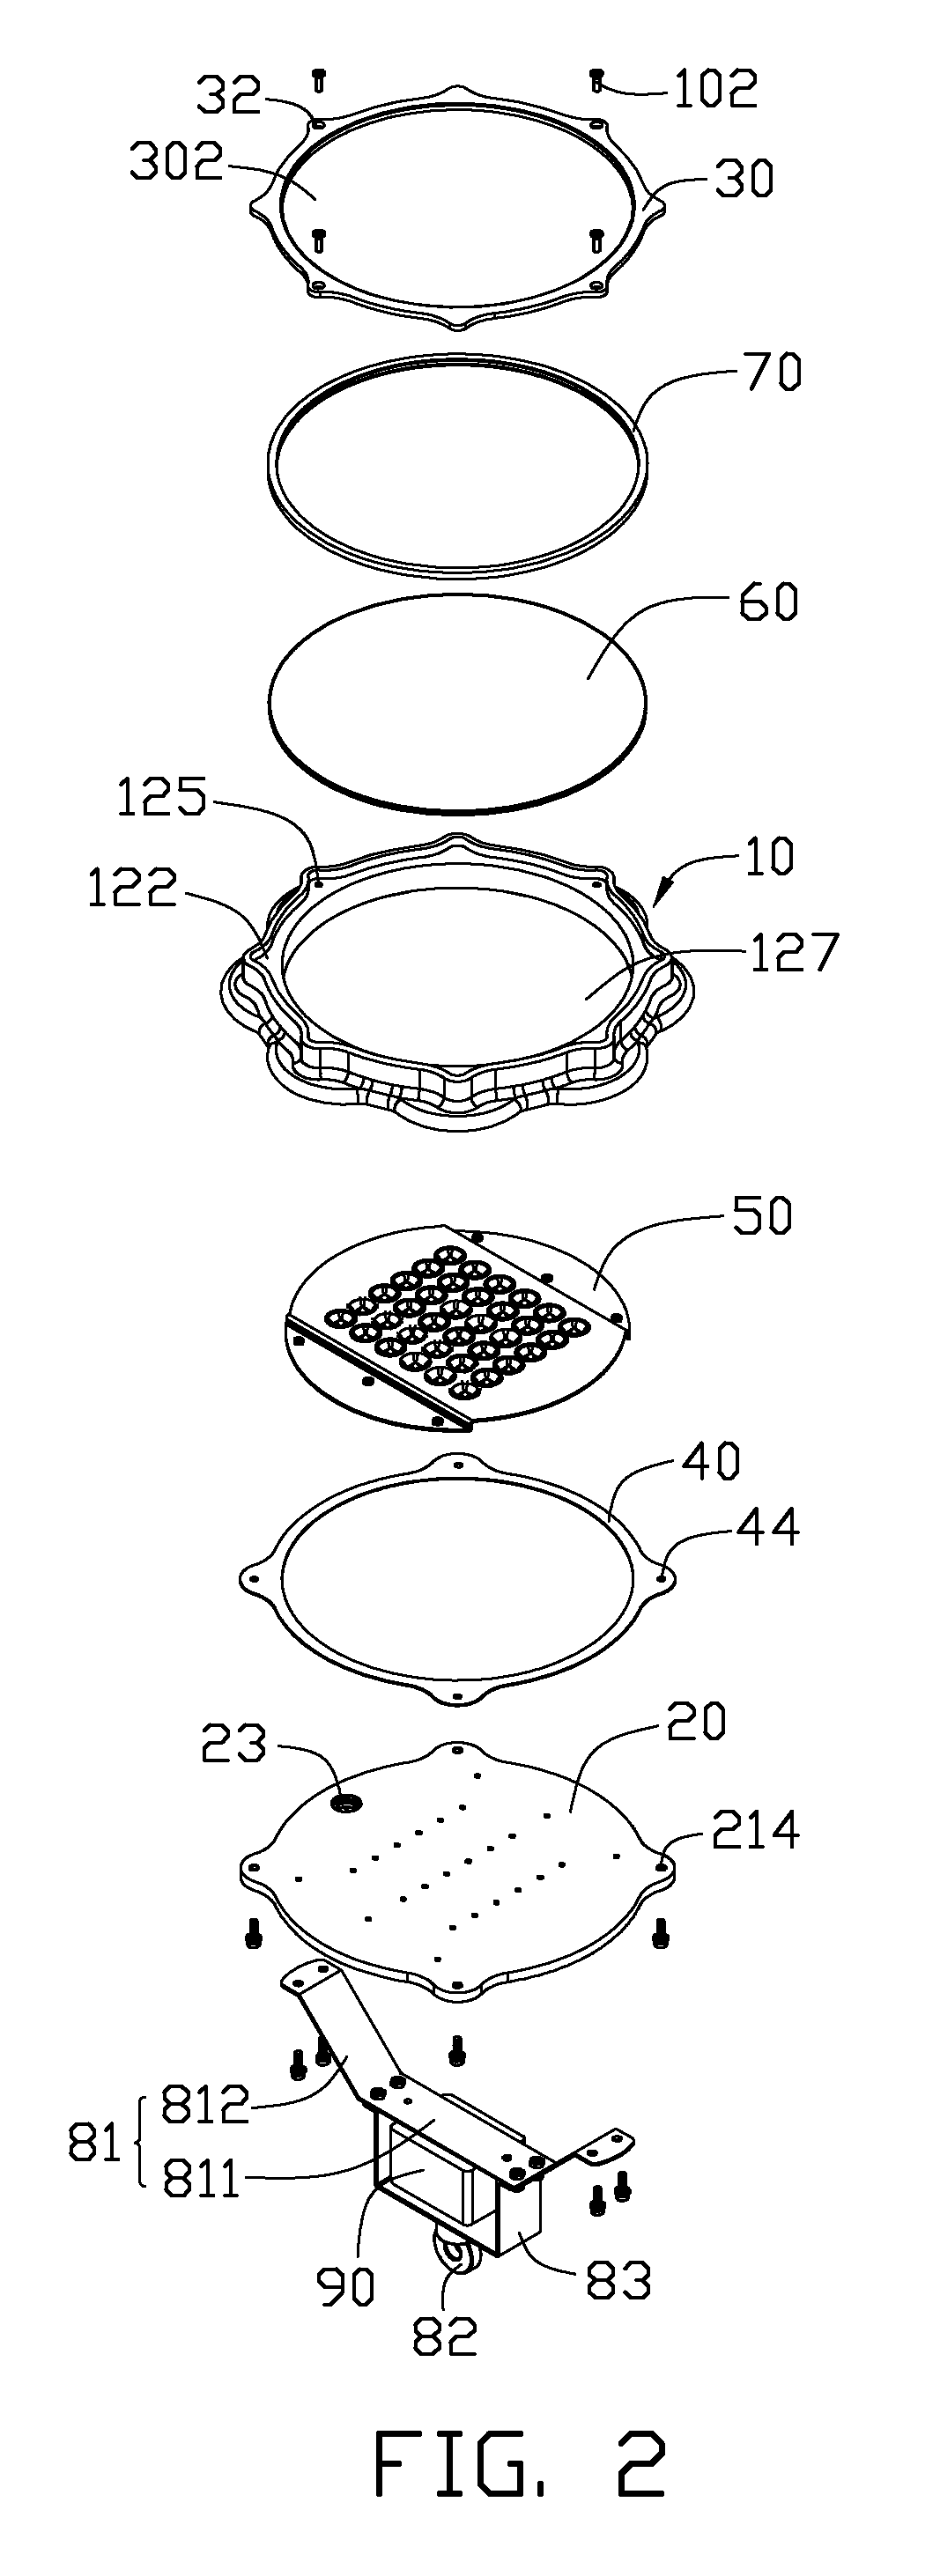 Compact LED lamp having heat dissipation structure